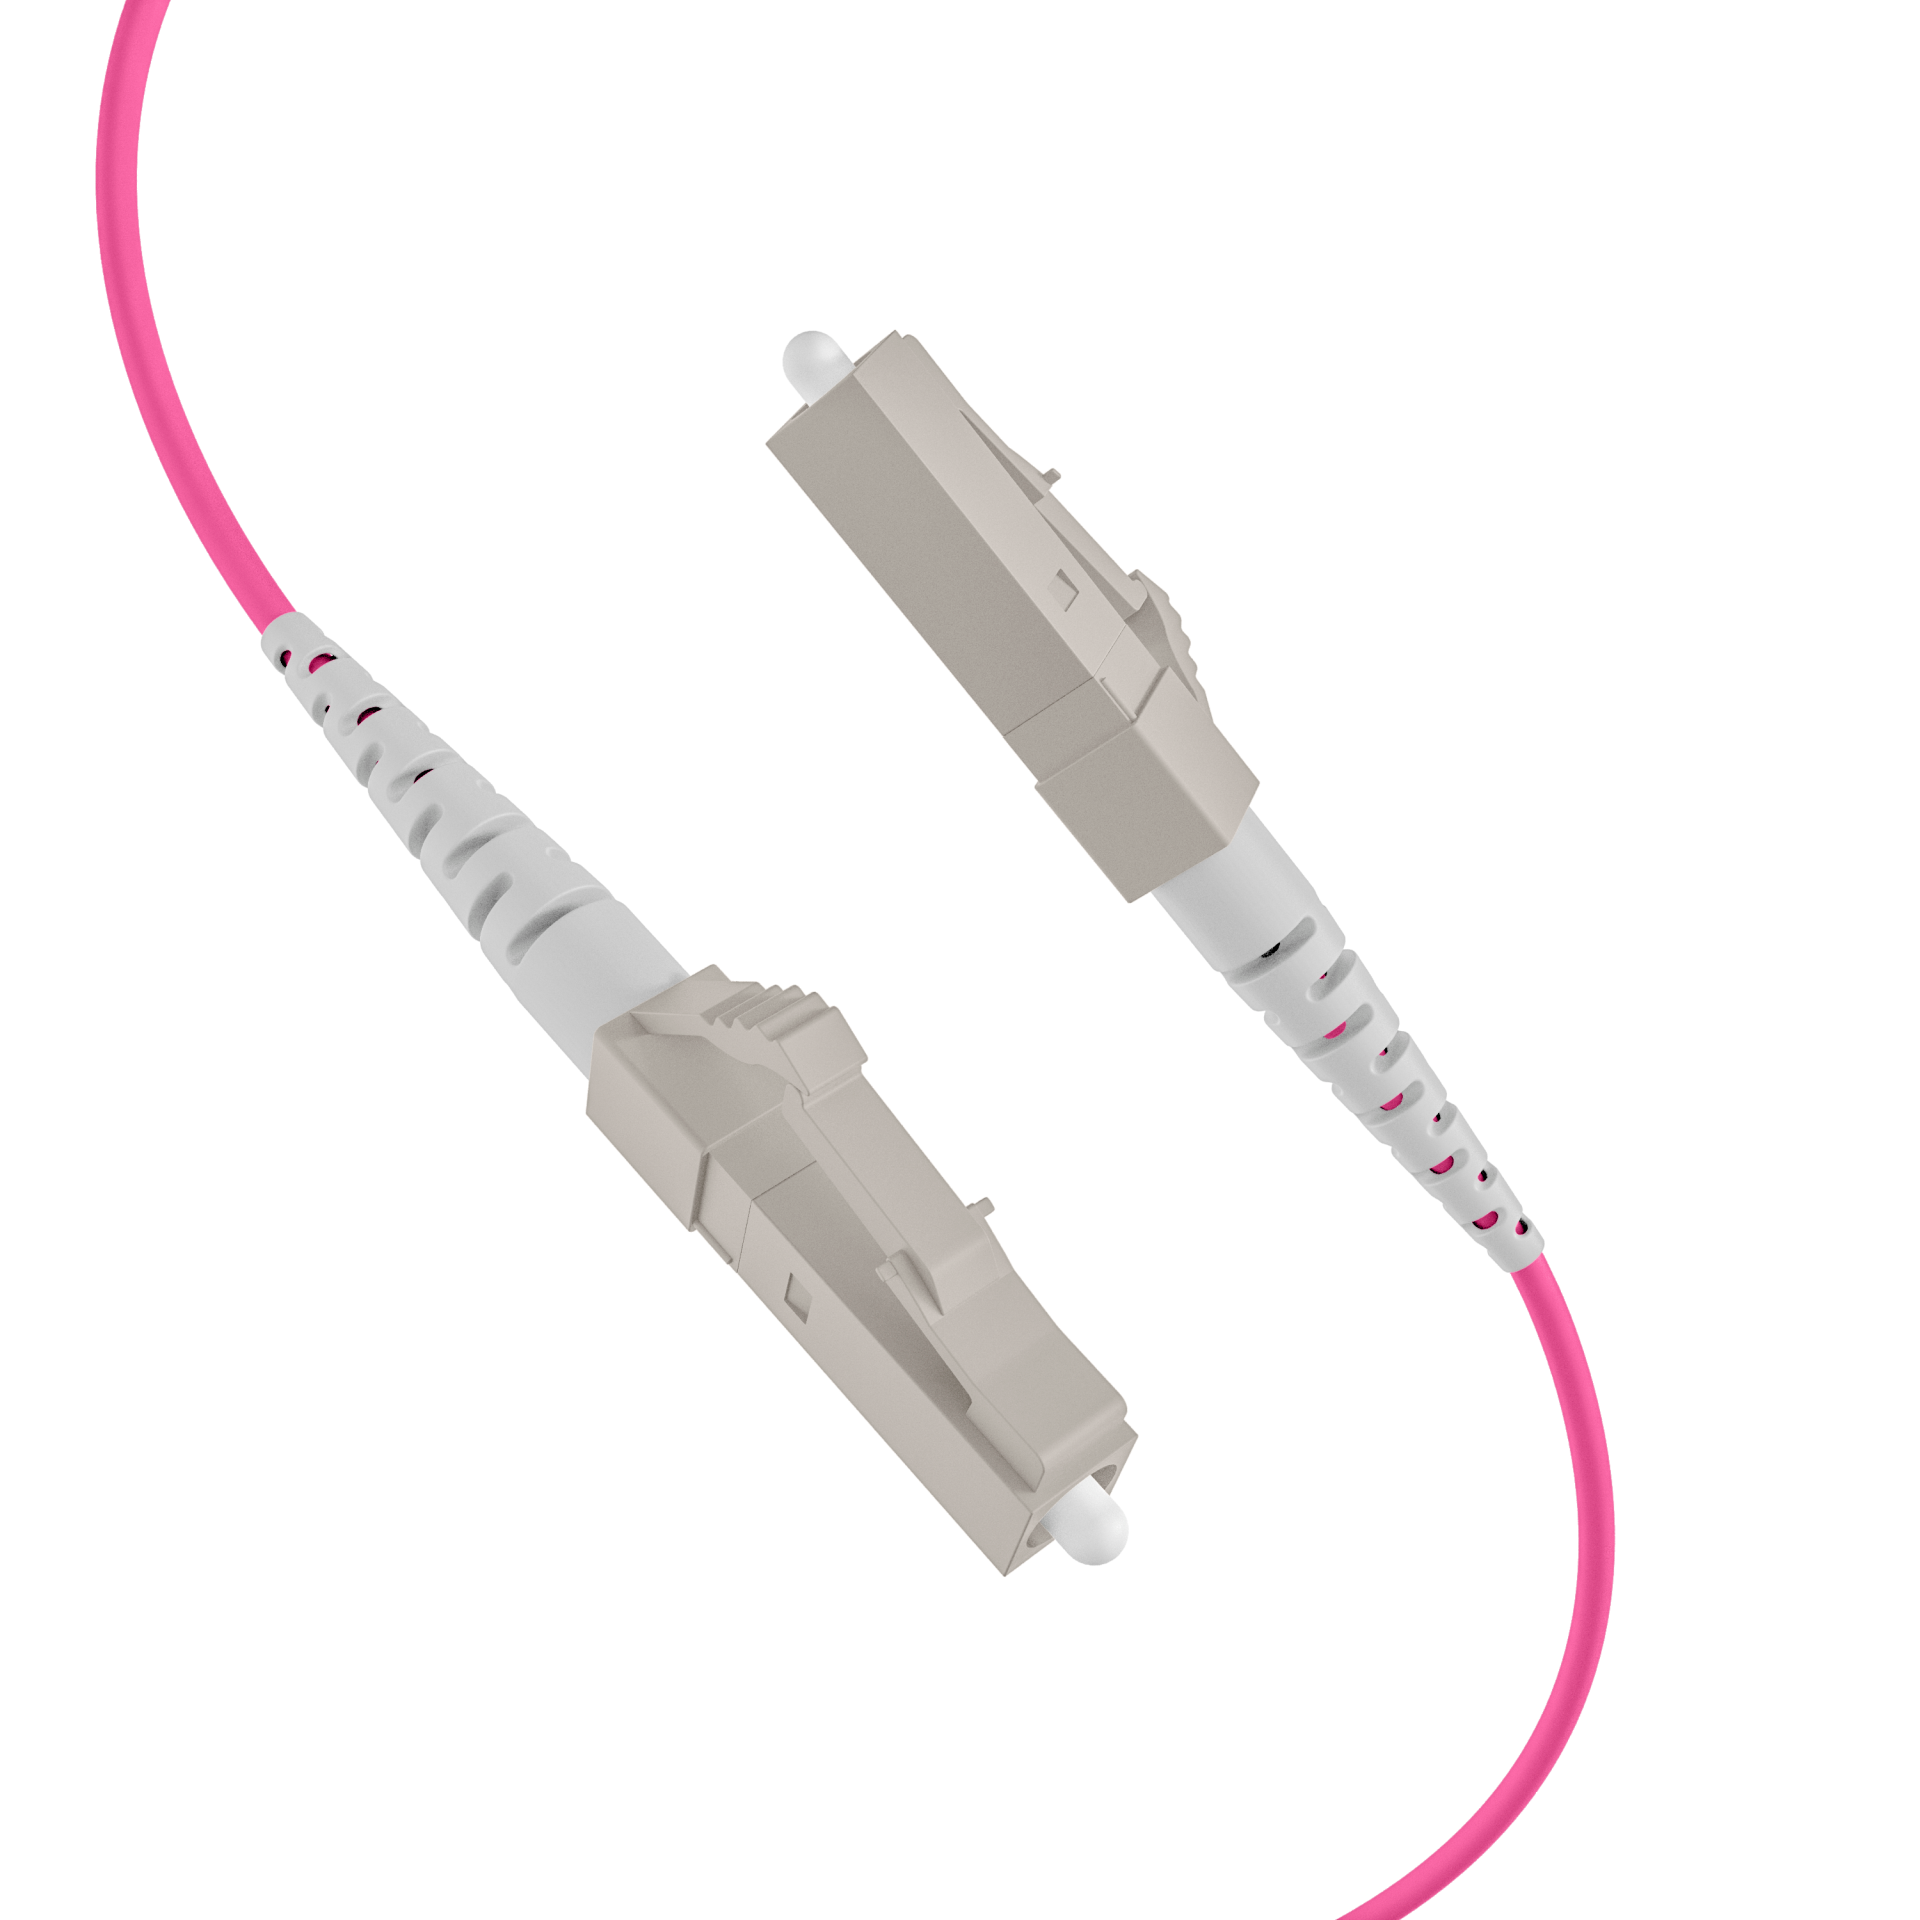 Trunkcable U-DQ(ZN)BH OM4 12G (1x12) LC-LC,100m Dca LSZH